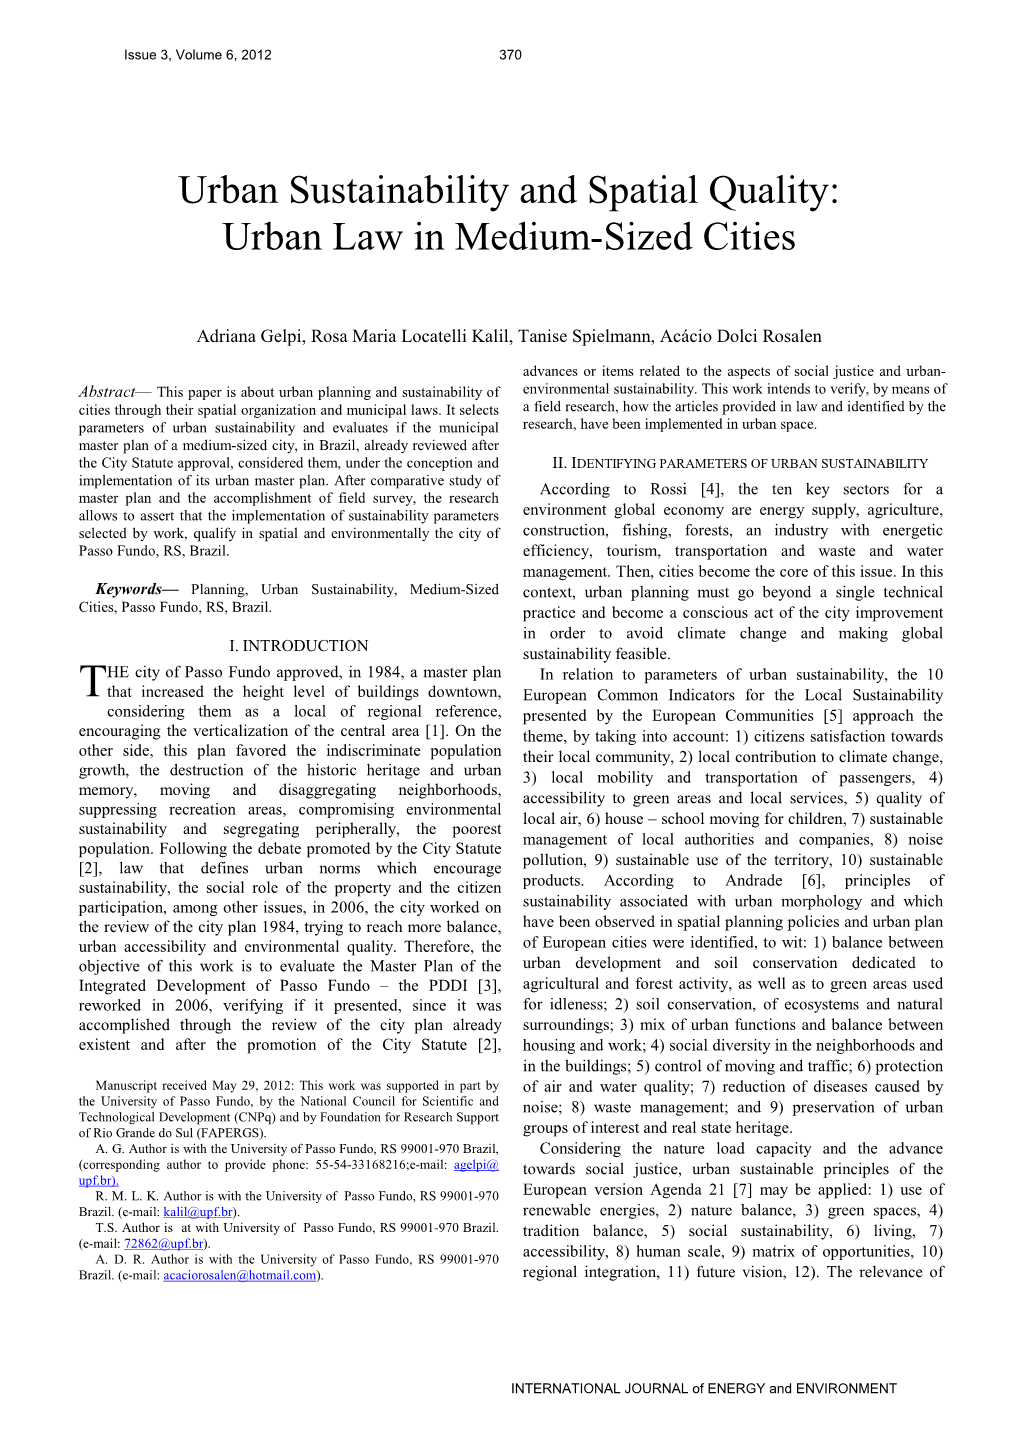 Urban Sustainability and Spatial Quality: Urban Law in Medium-Sized Cities